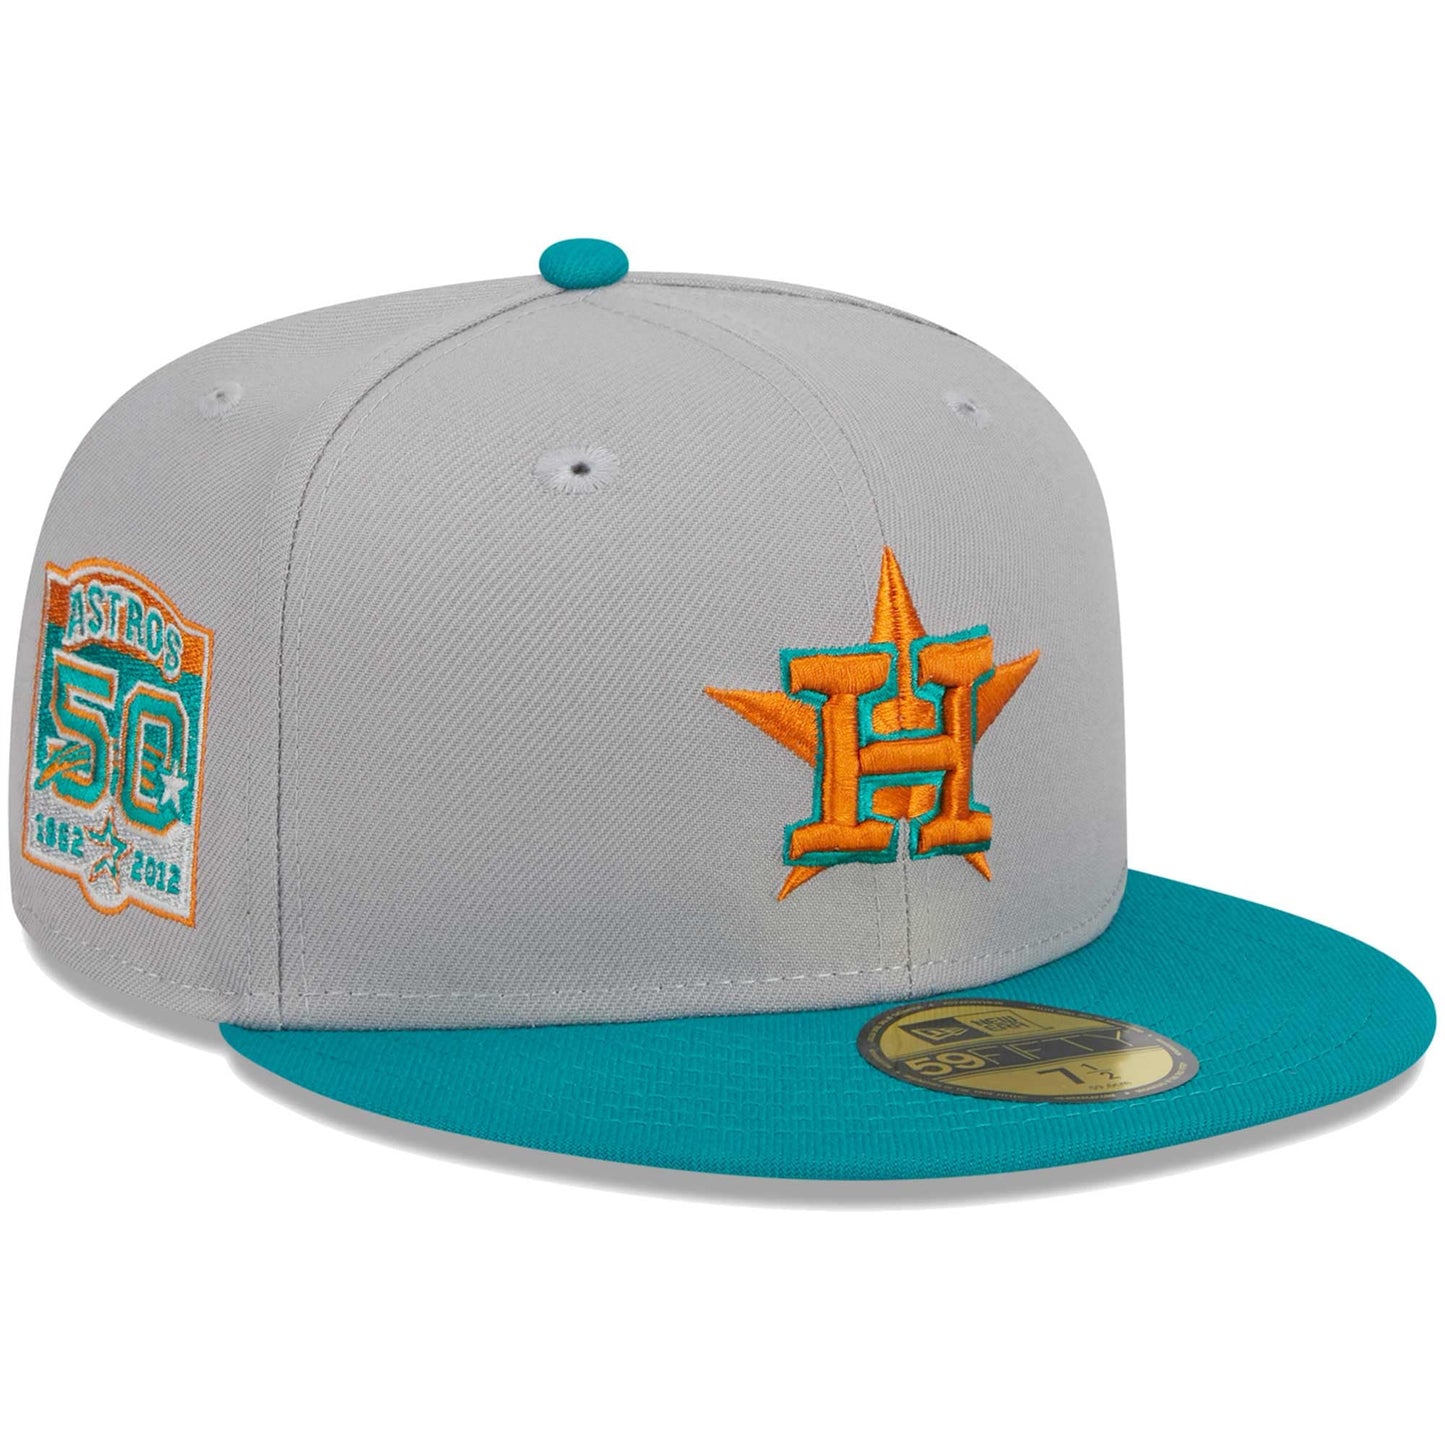 Houston Astros New Era 59FIFTY Fitted Hat - Gray/Teal